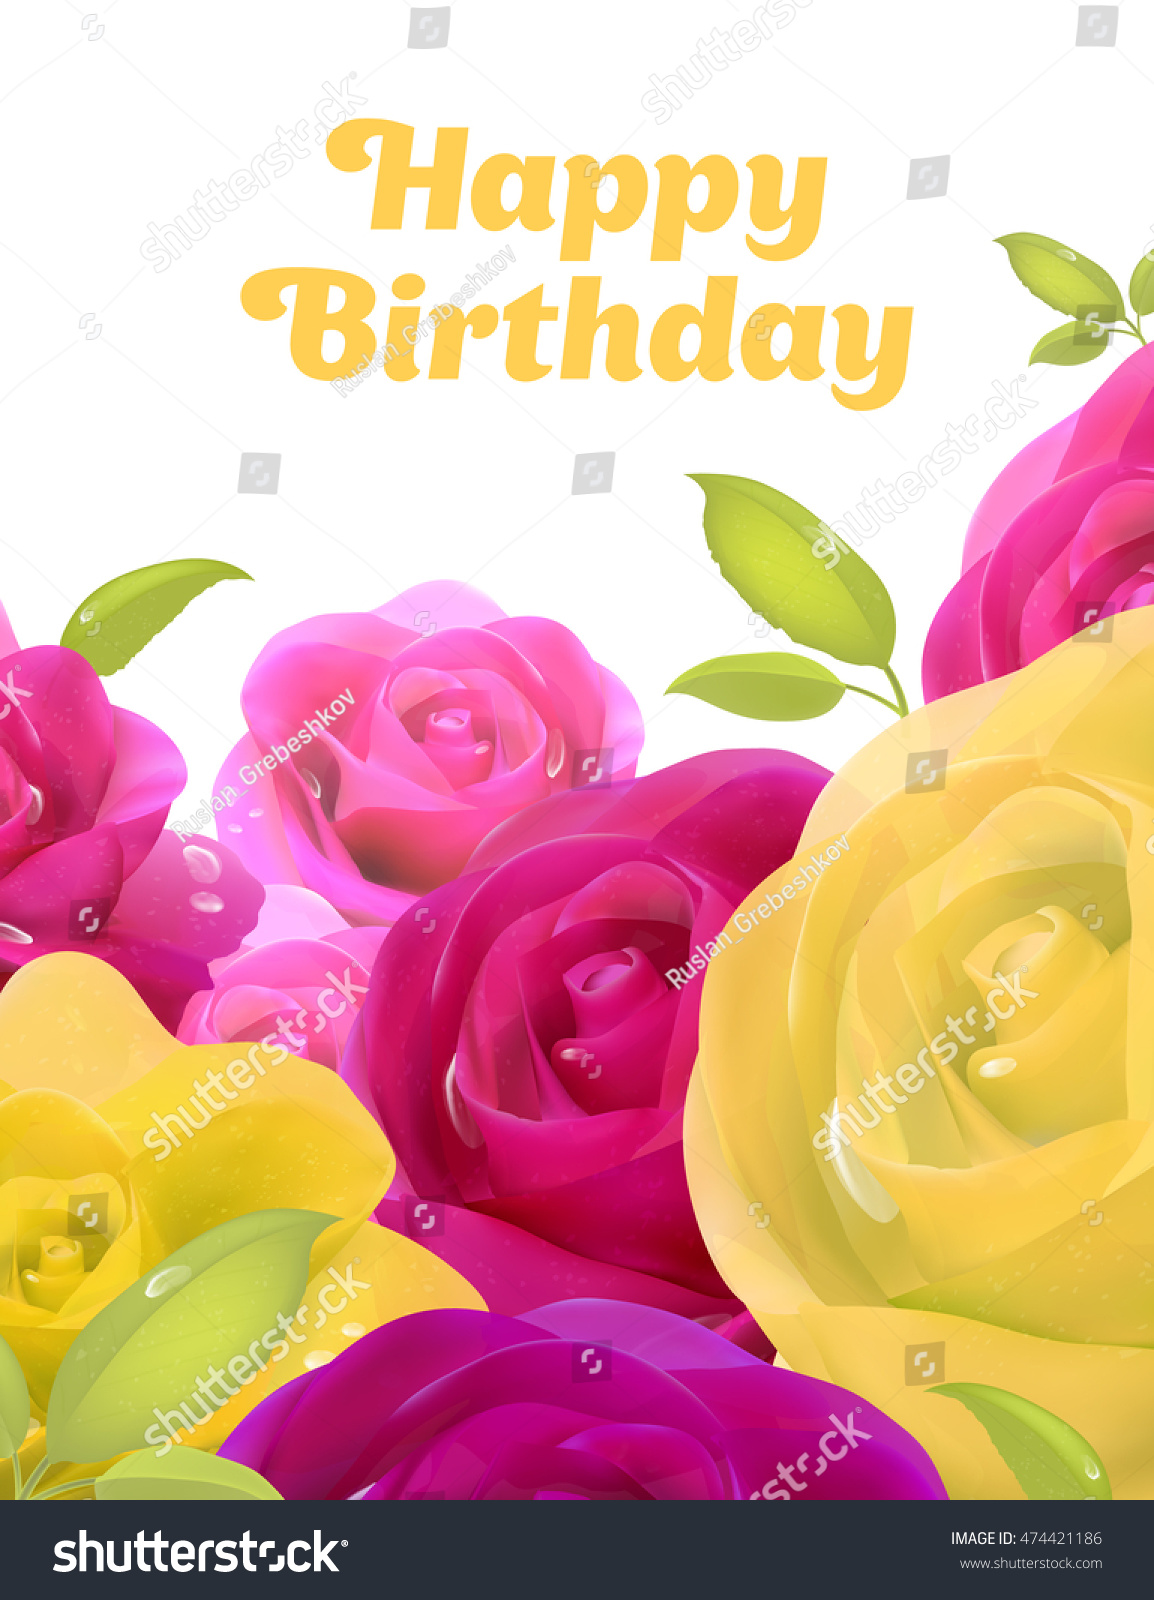 Details about   Happy Birthday Flowers Orange And Yellow Roses Floral Religious Greeting Card 